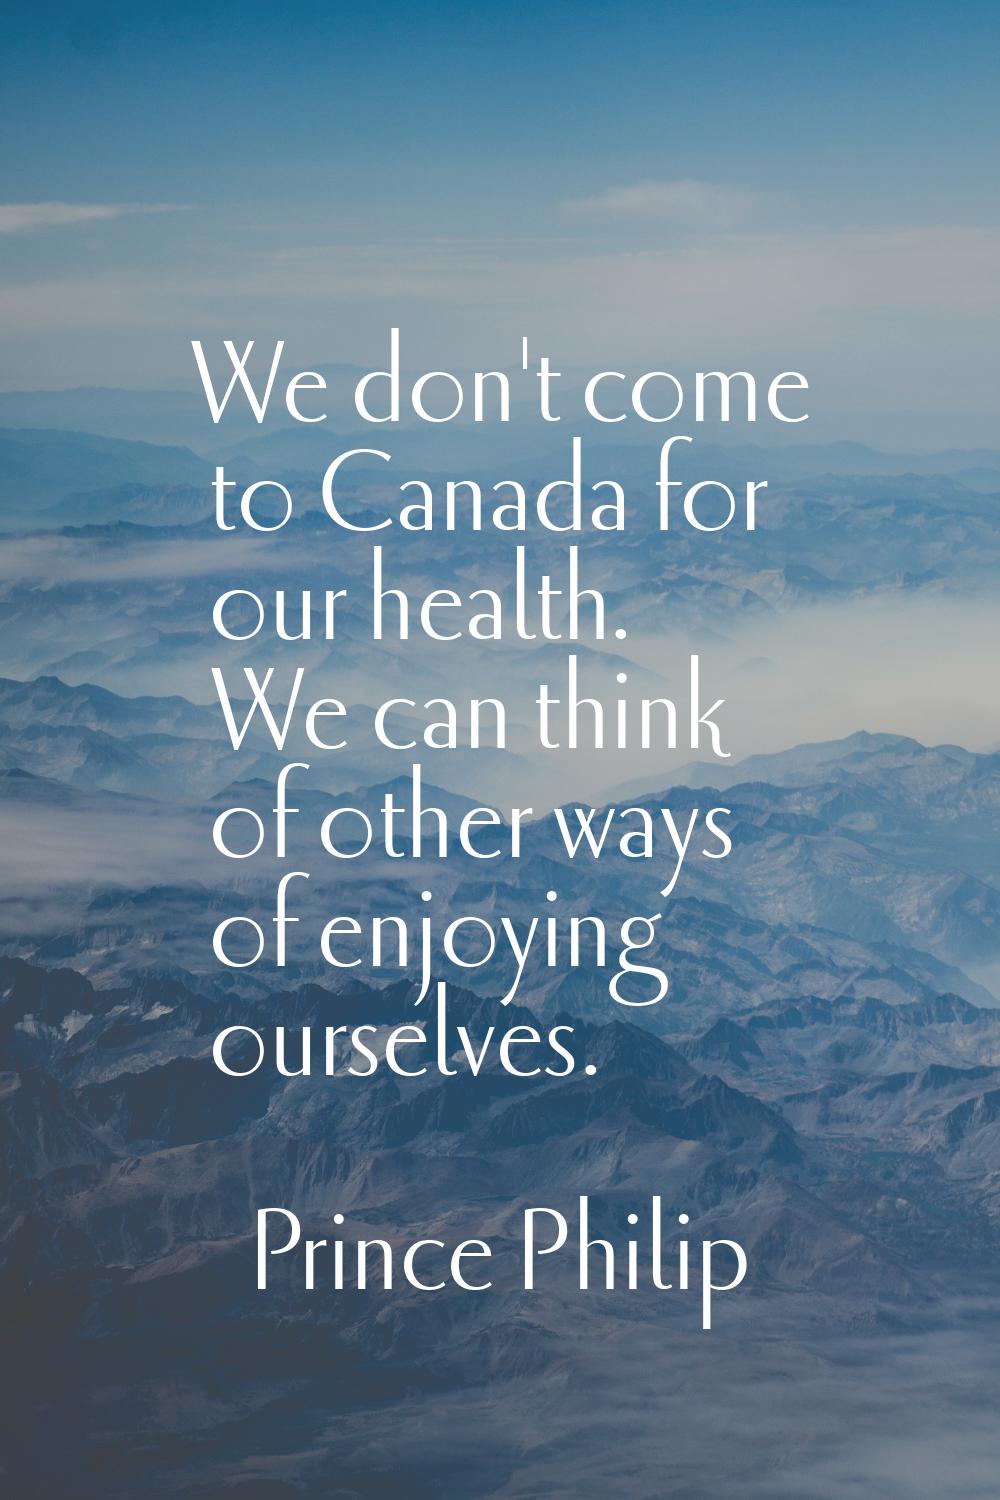 We don't come to Canada for our health. We can think of other ways of enjoying ourselves.